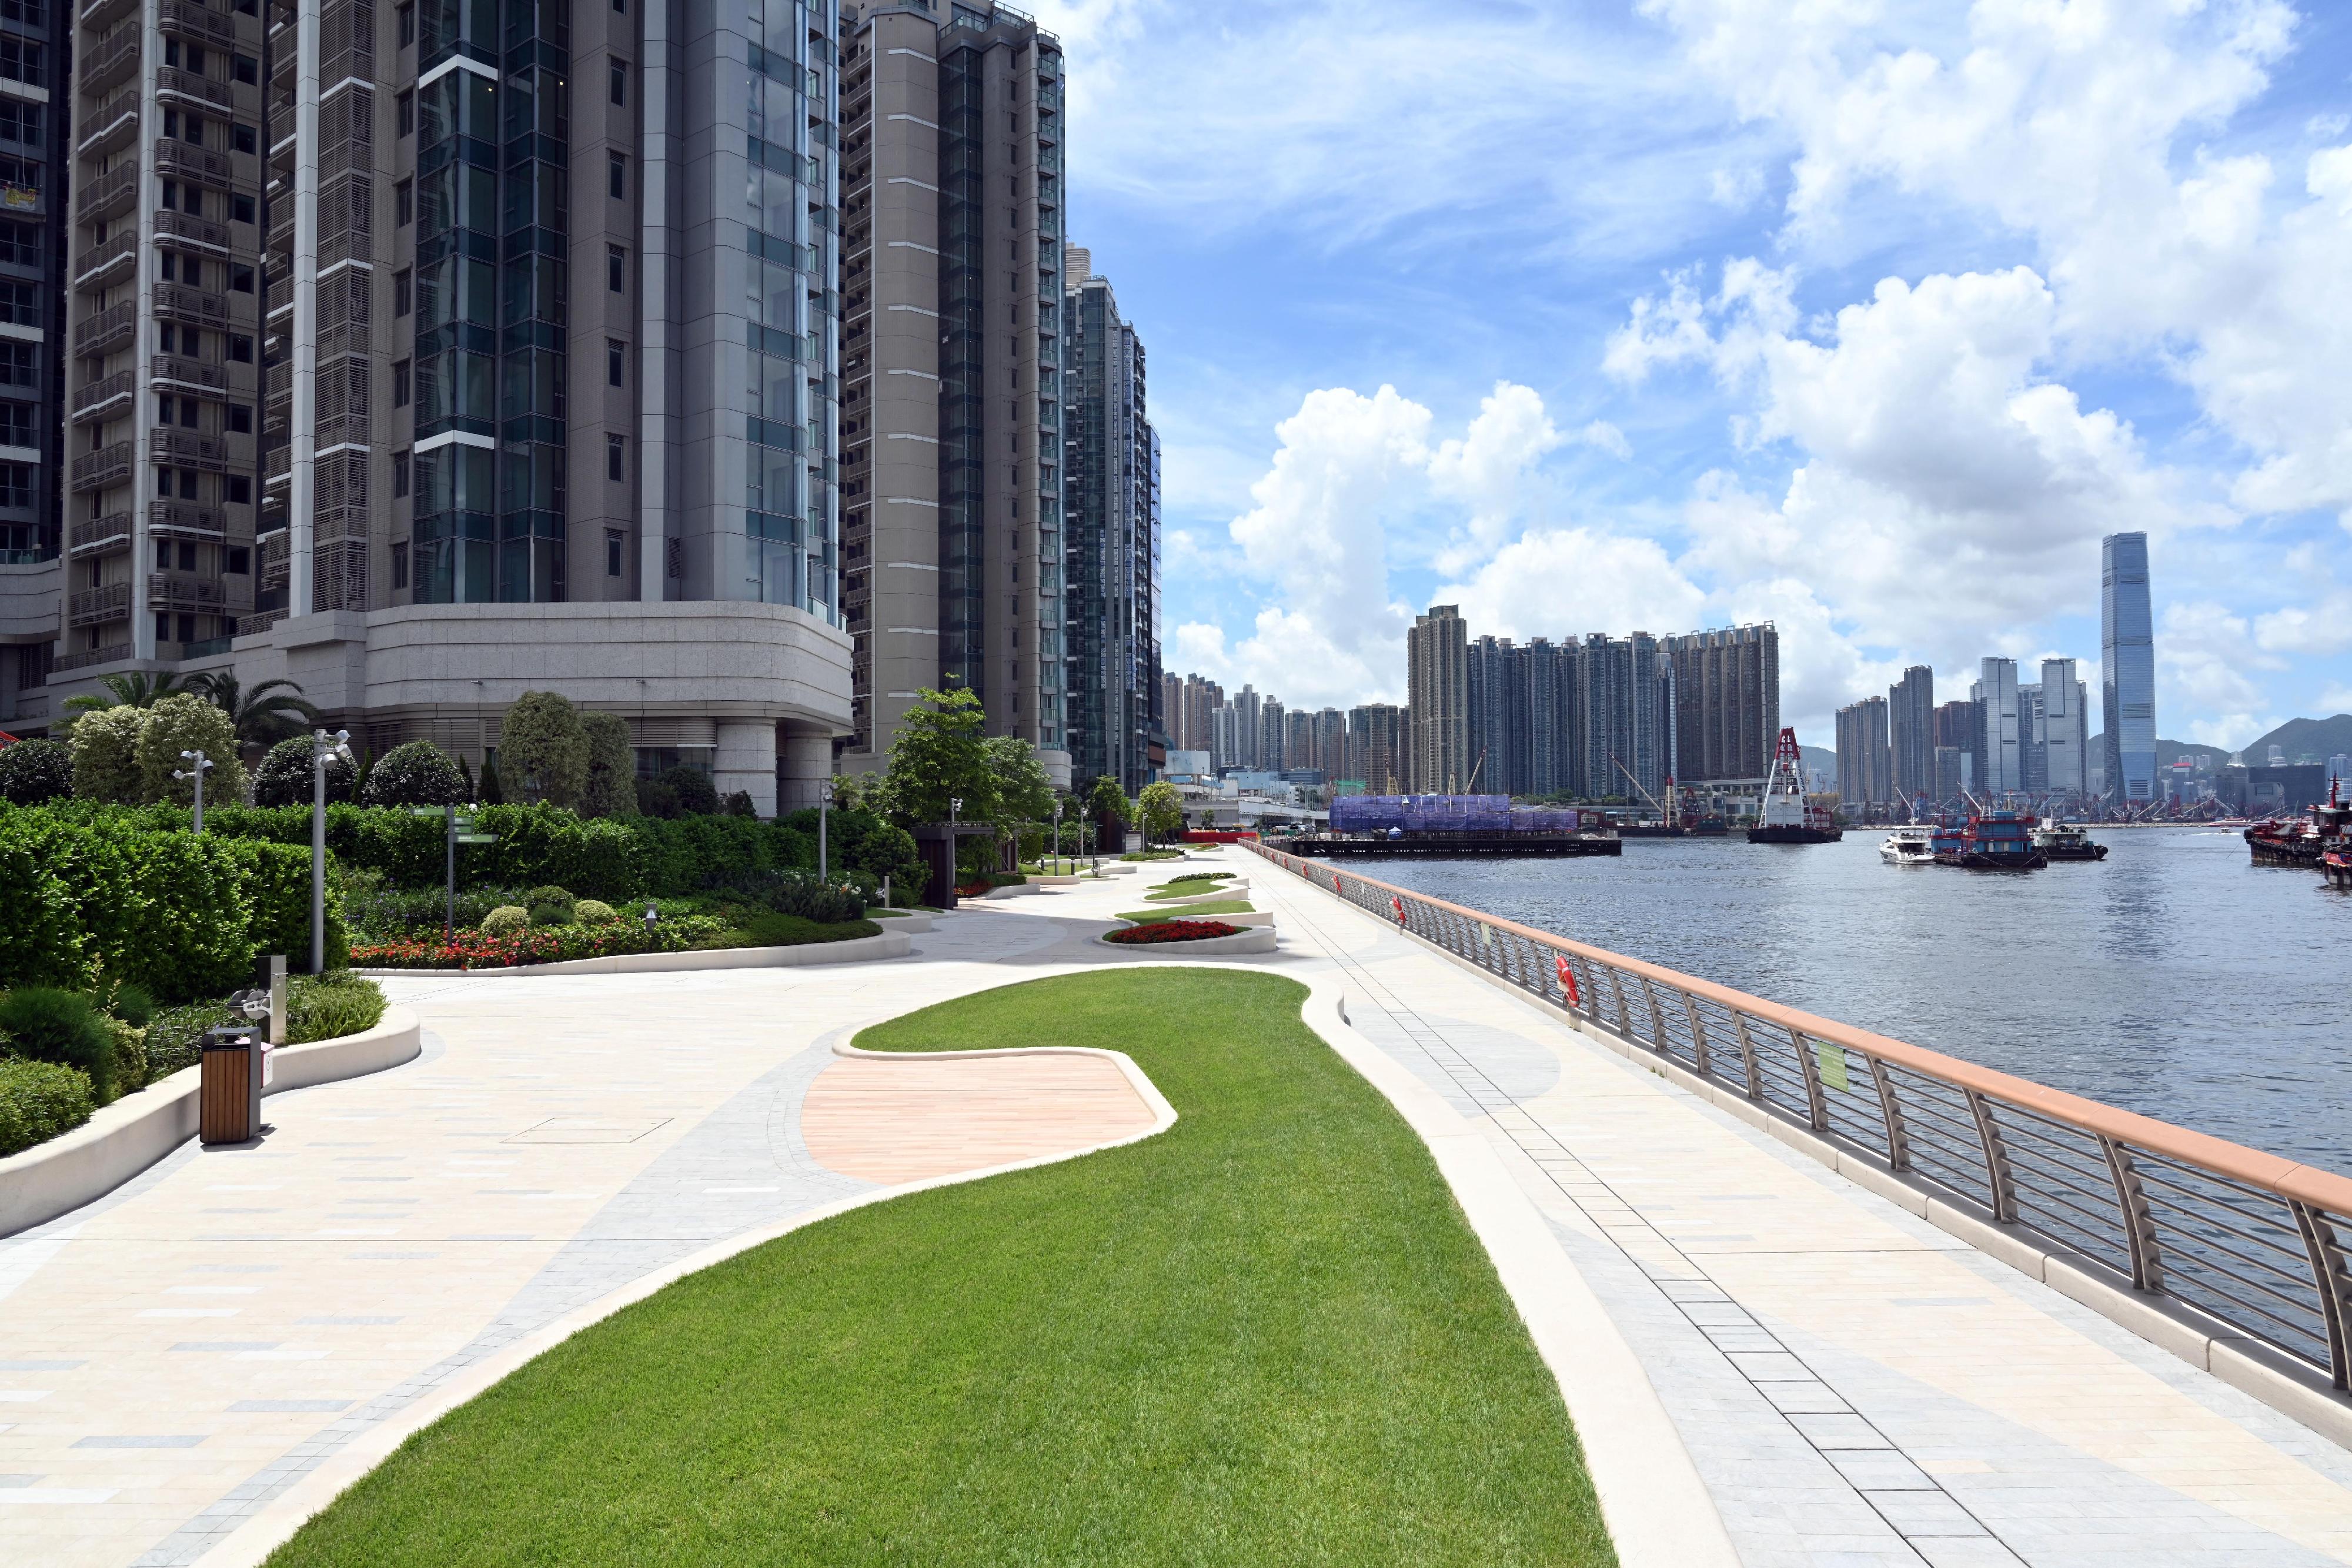 The Leisure and Cultural Services Department announced today (July 14) that the newly built Cheung Sha Wan Promenade is now fully opened for public use. Photo shows the waterfront promenade.


